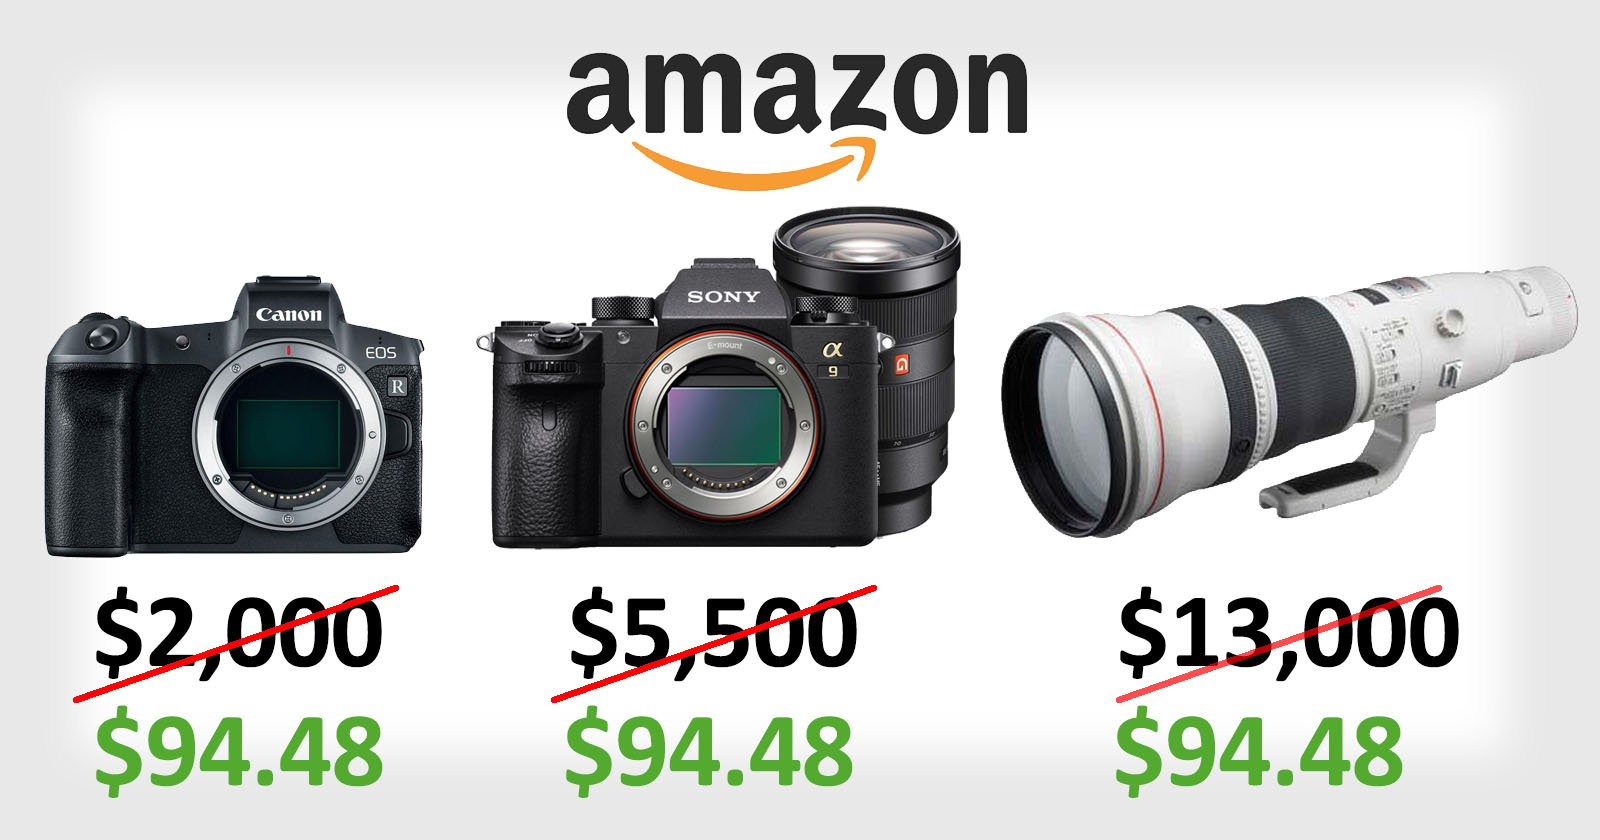 Amazon Accidentally Sold $13,000+ Camera Gear for $100 on Prime Day thumbnail